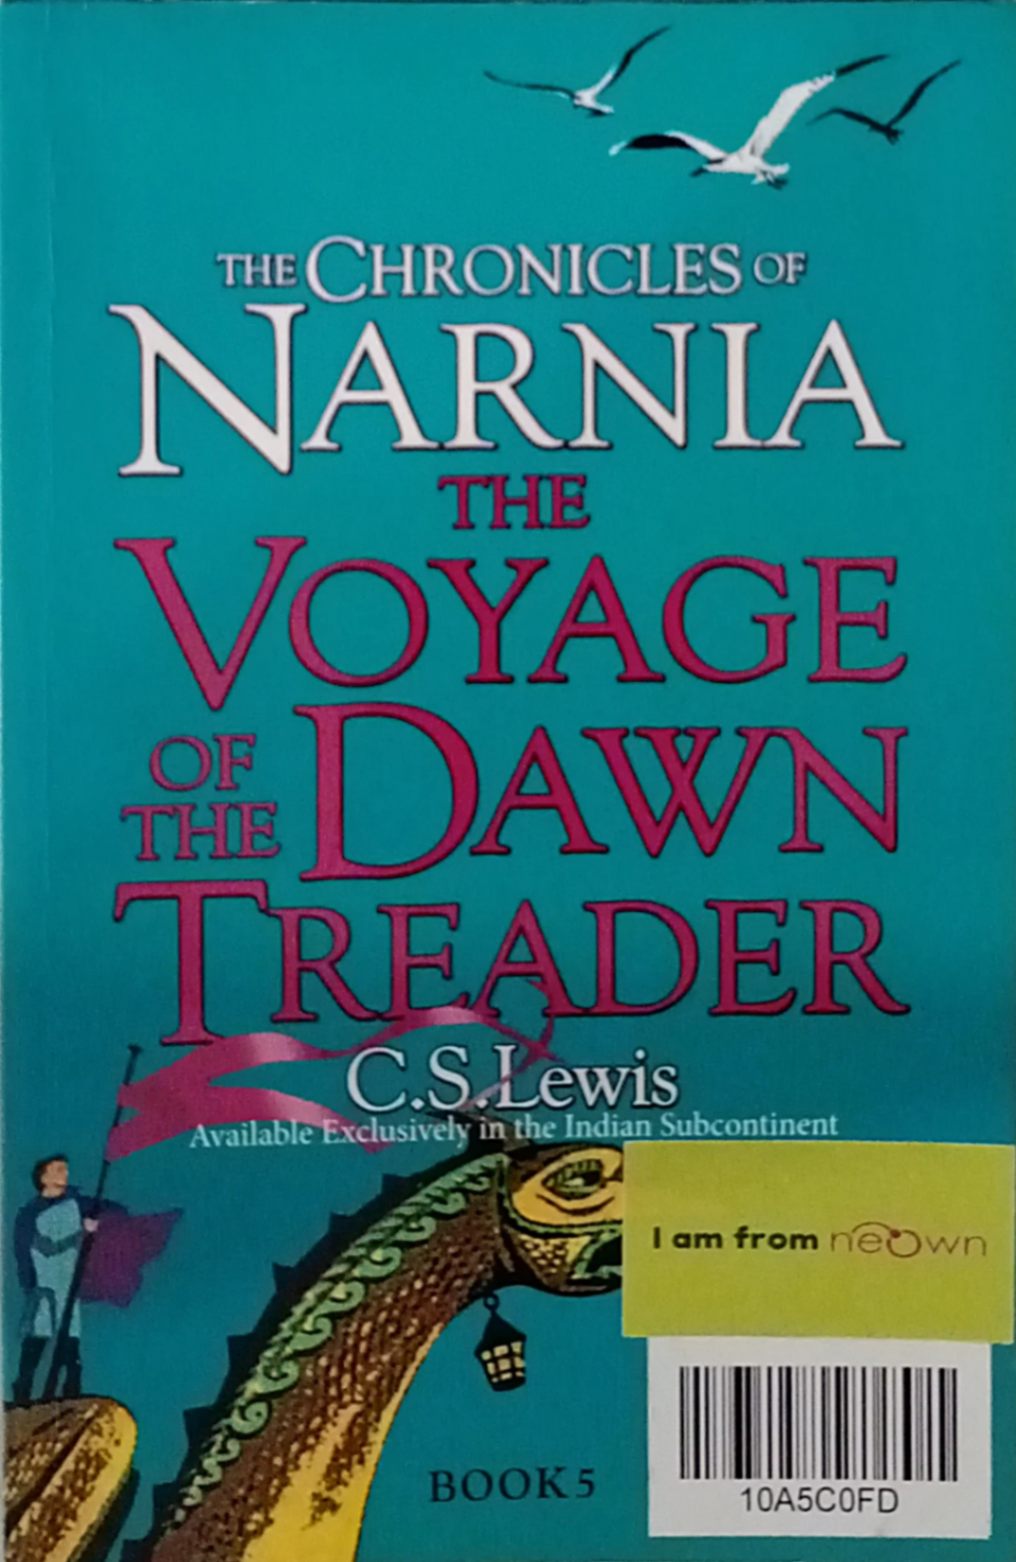 The Chronicles of Narnia - The Voyage of the Dawn Treader